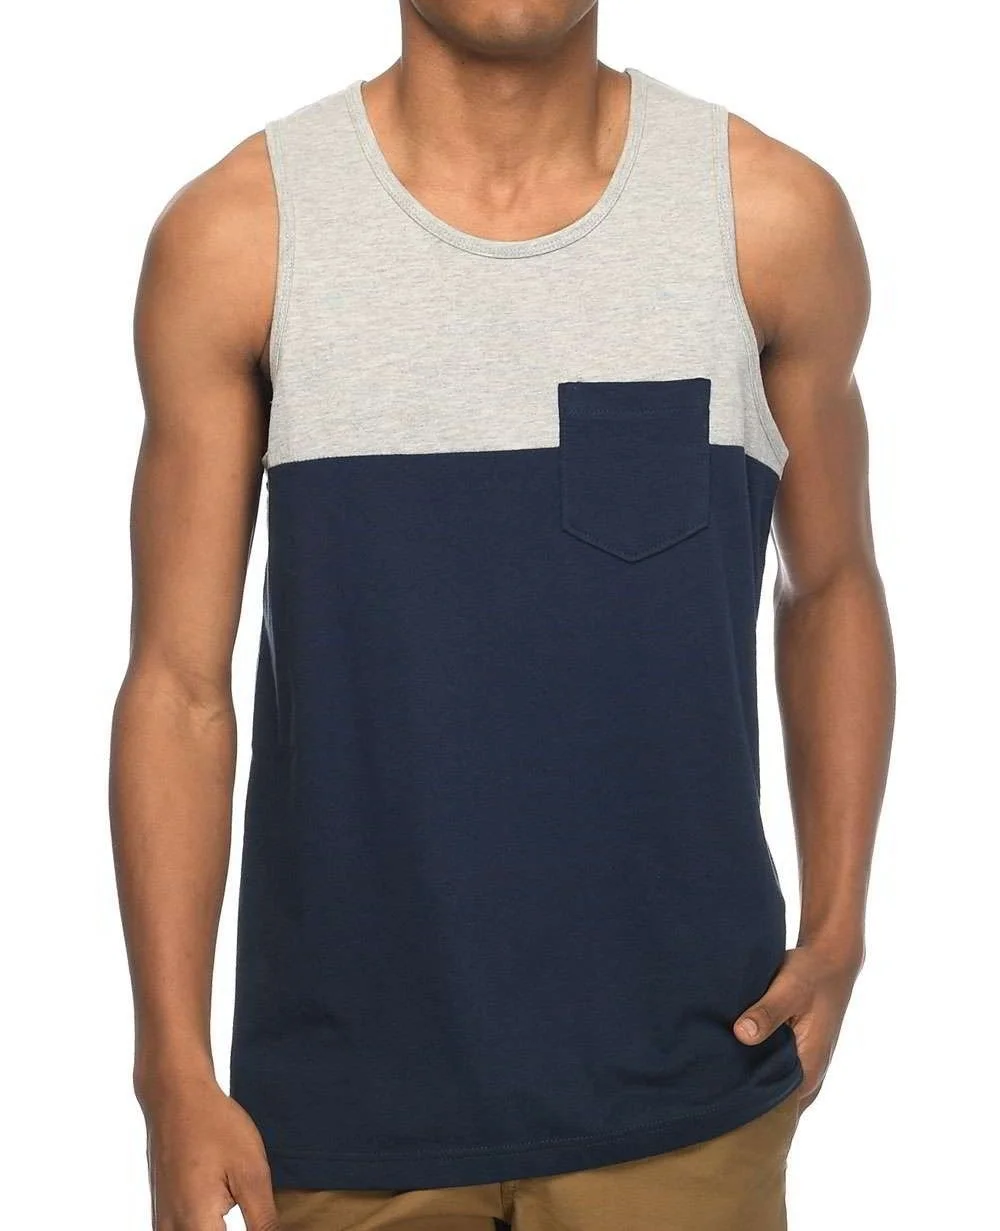 Wholesale Blocked With Chest Pocket Tank Top Manufacturer Supplier In Bangladesh Factory